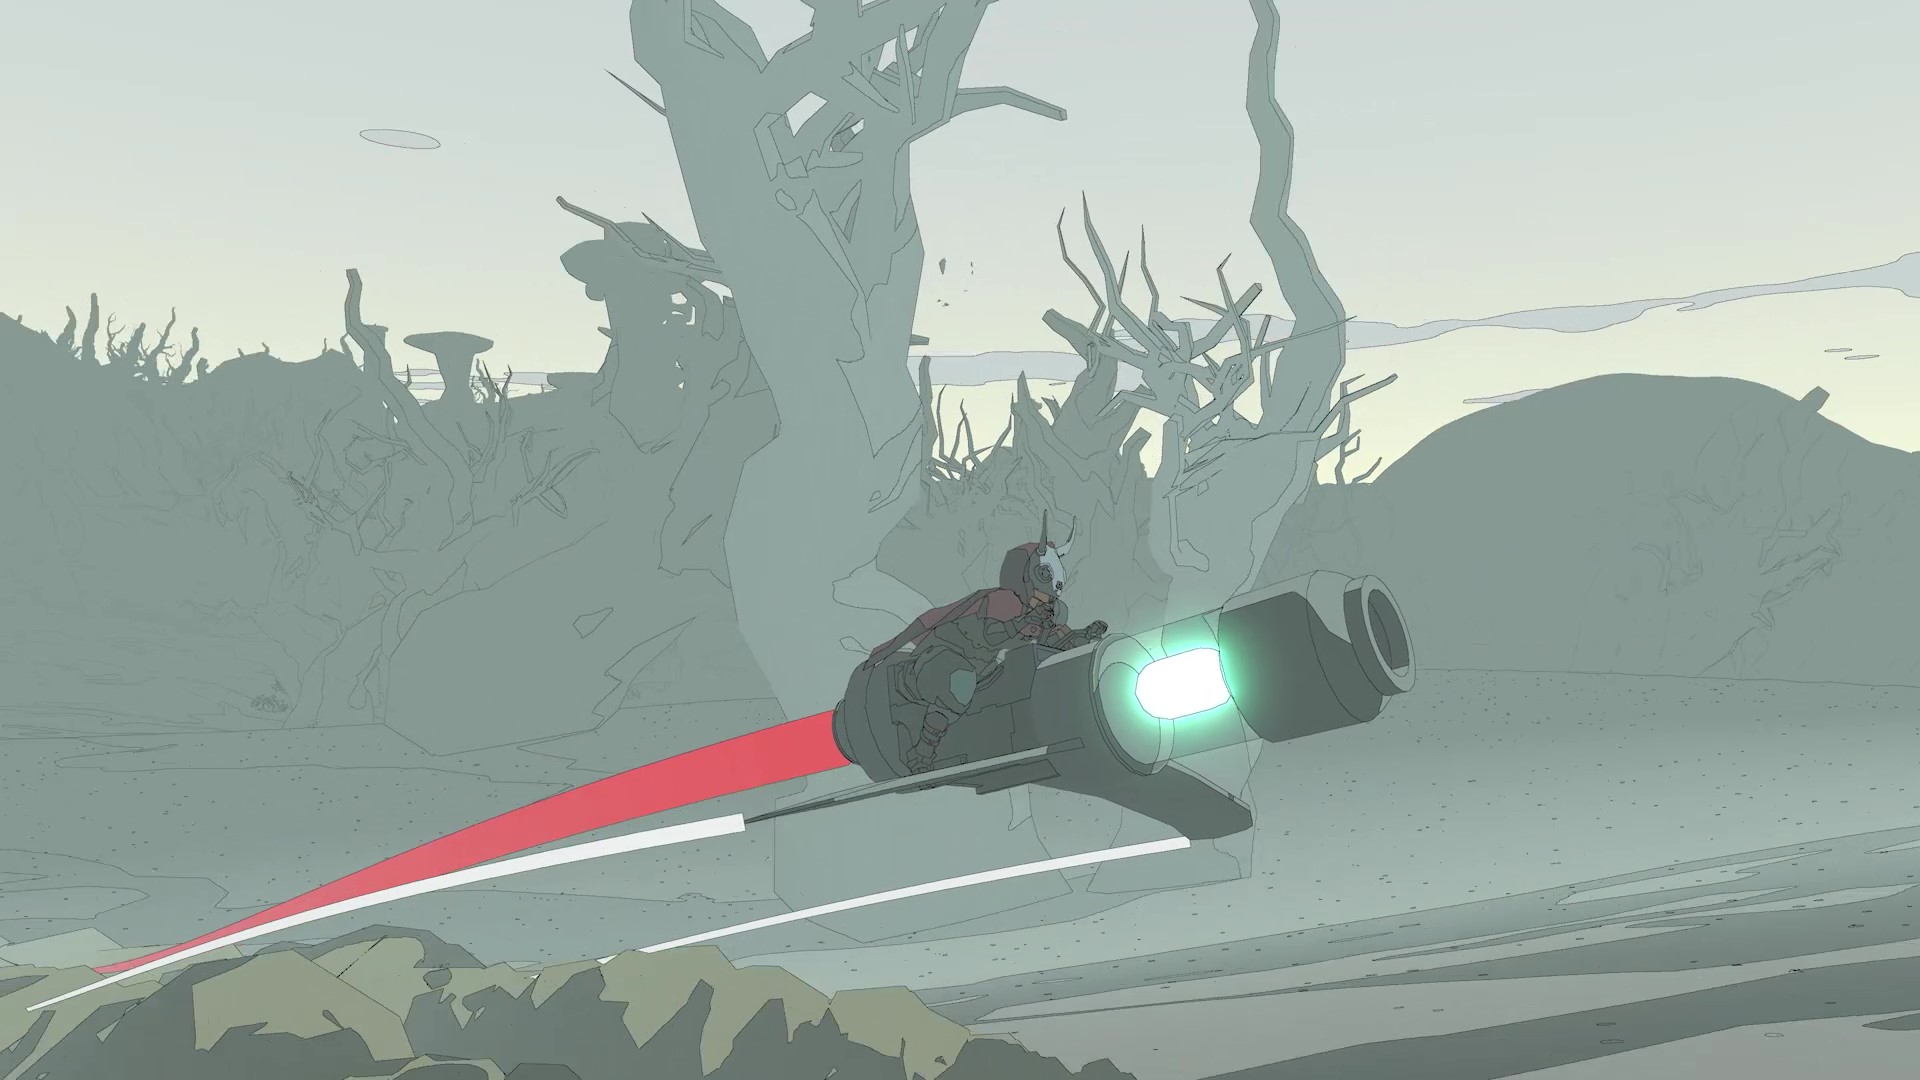 Screenshot of Sable riding her glider against a grey background